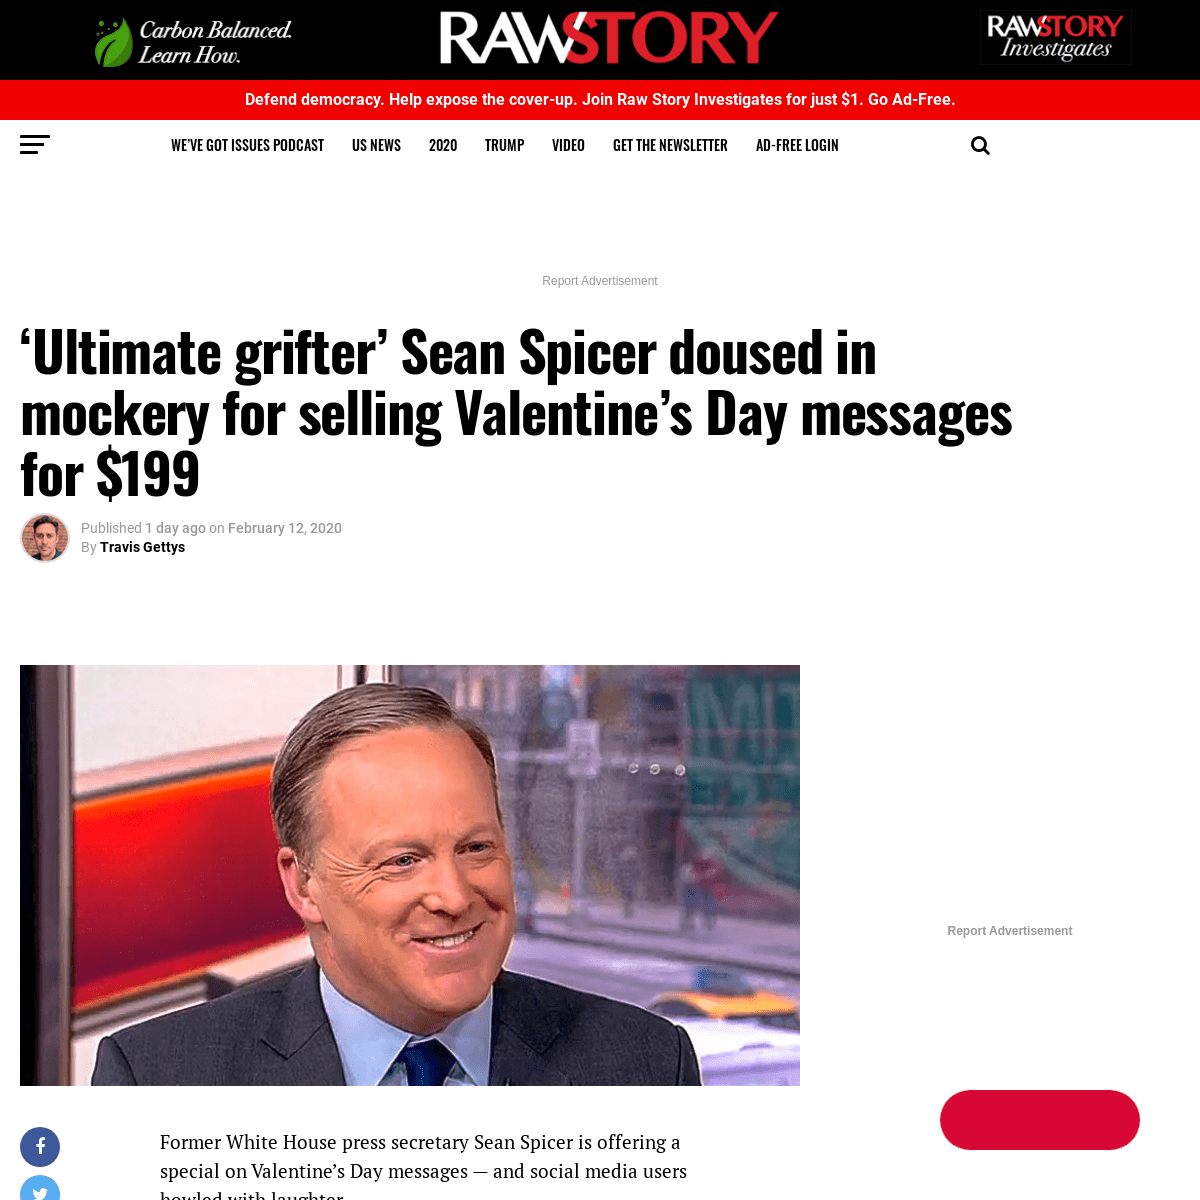 A complete backup of www.rawstory.com/2020/02/ultimate-grifter-sean-spicer-doused-in-mockery-for-selling-valentines-day-messages